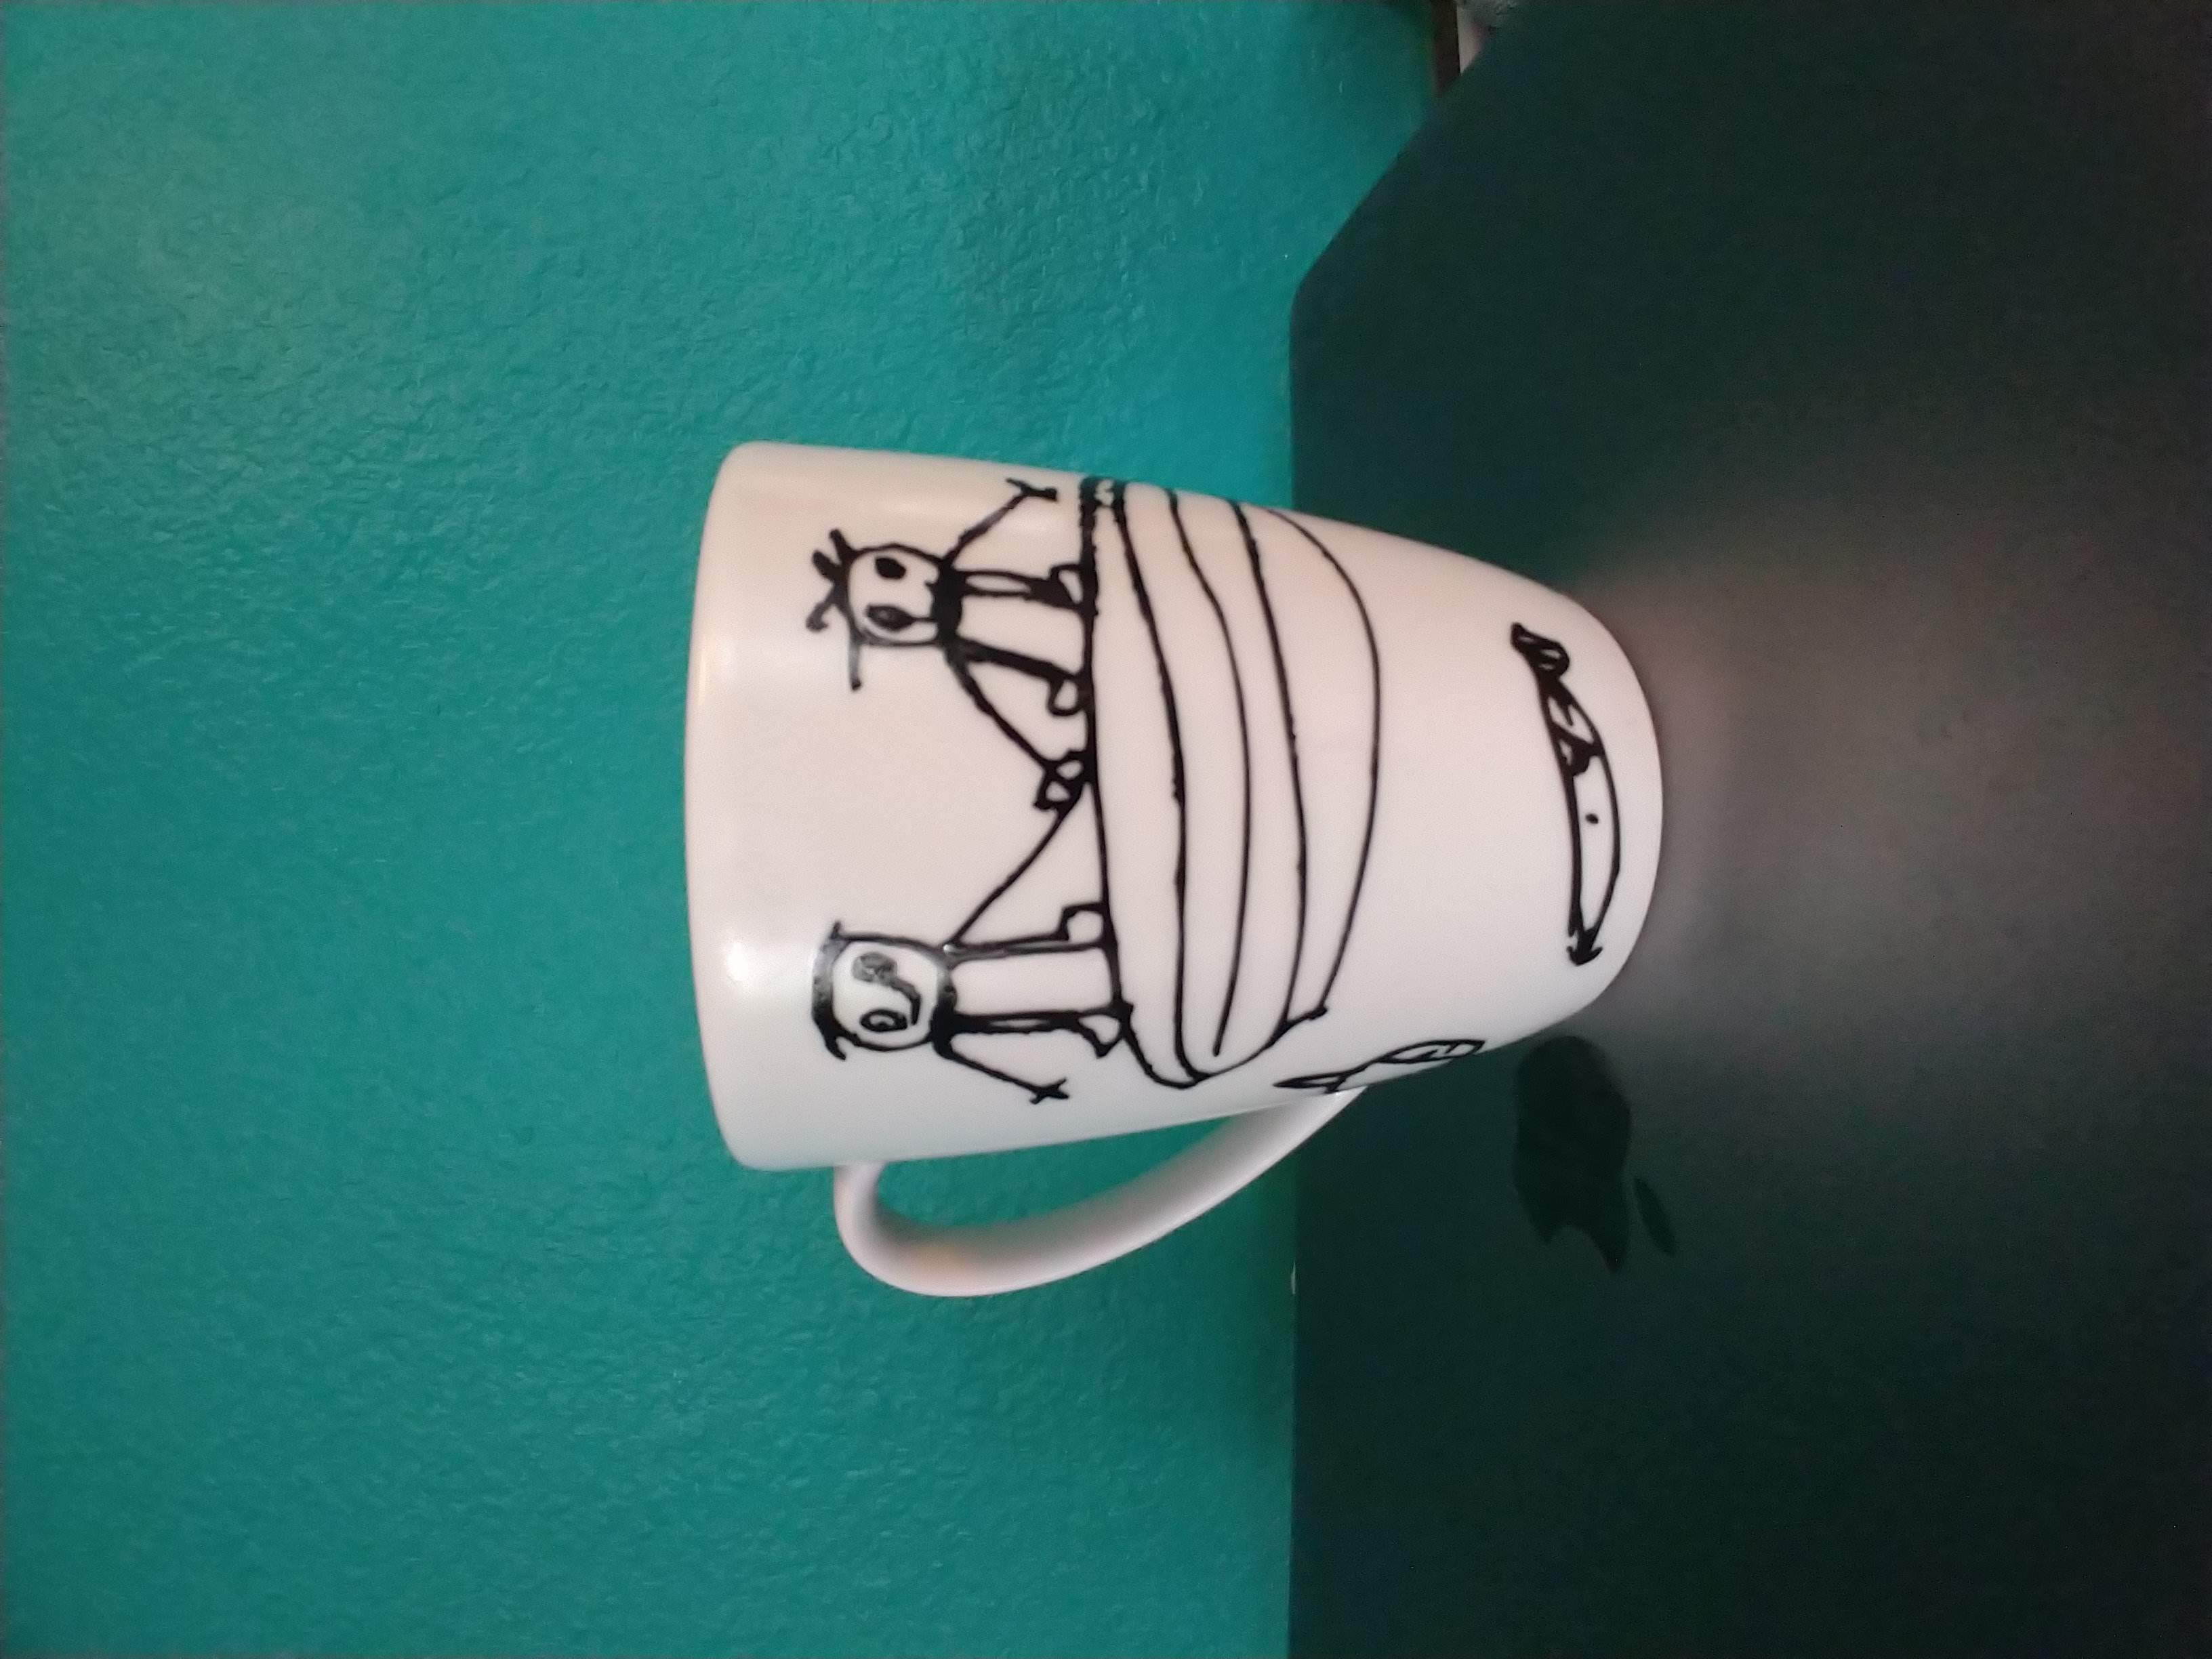 A mug with a child's drawing on it